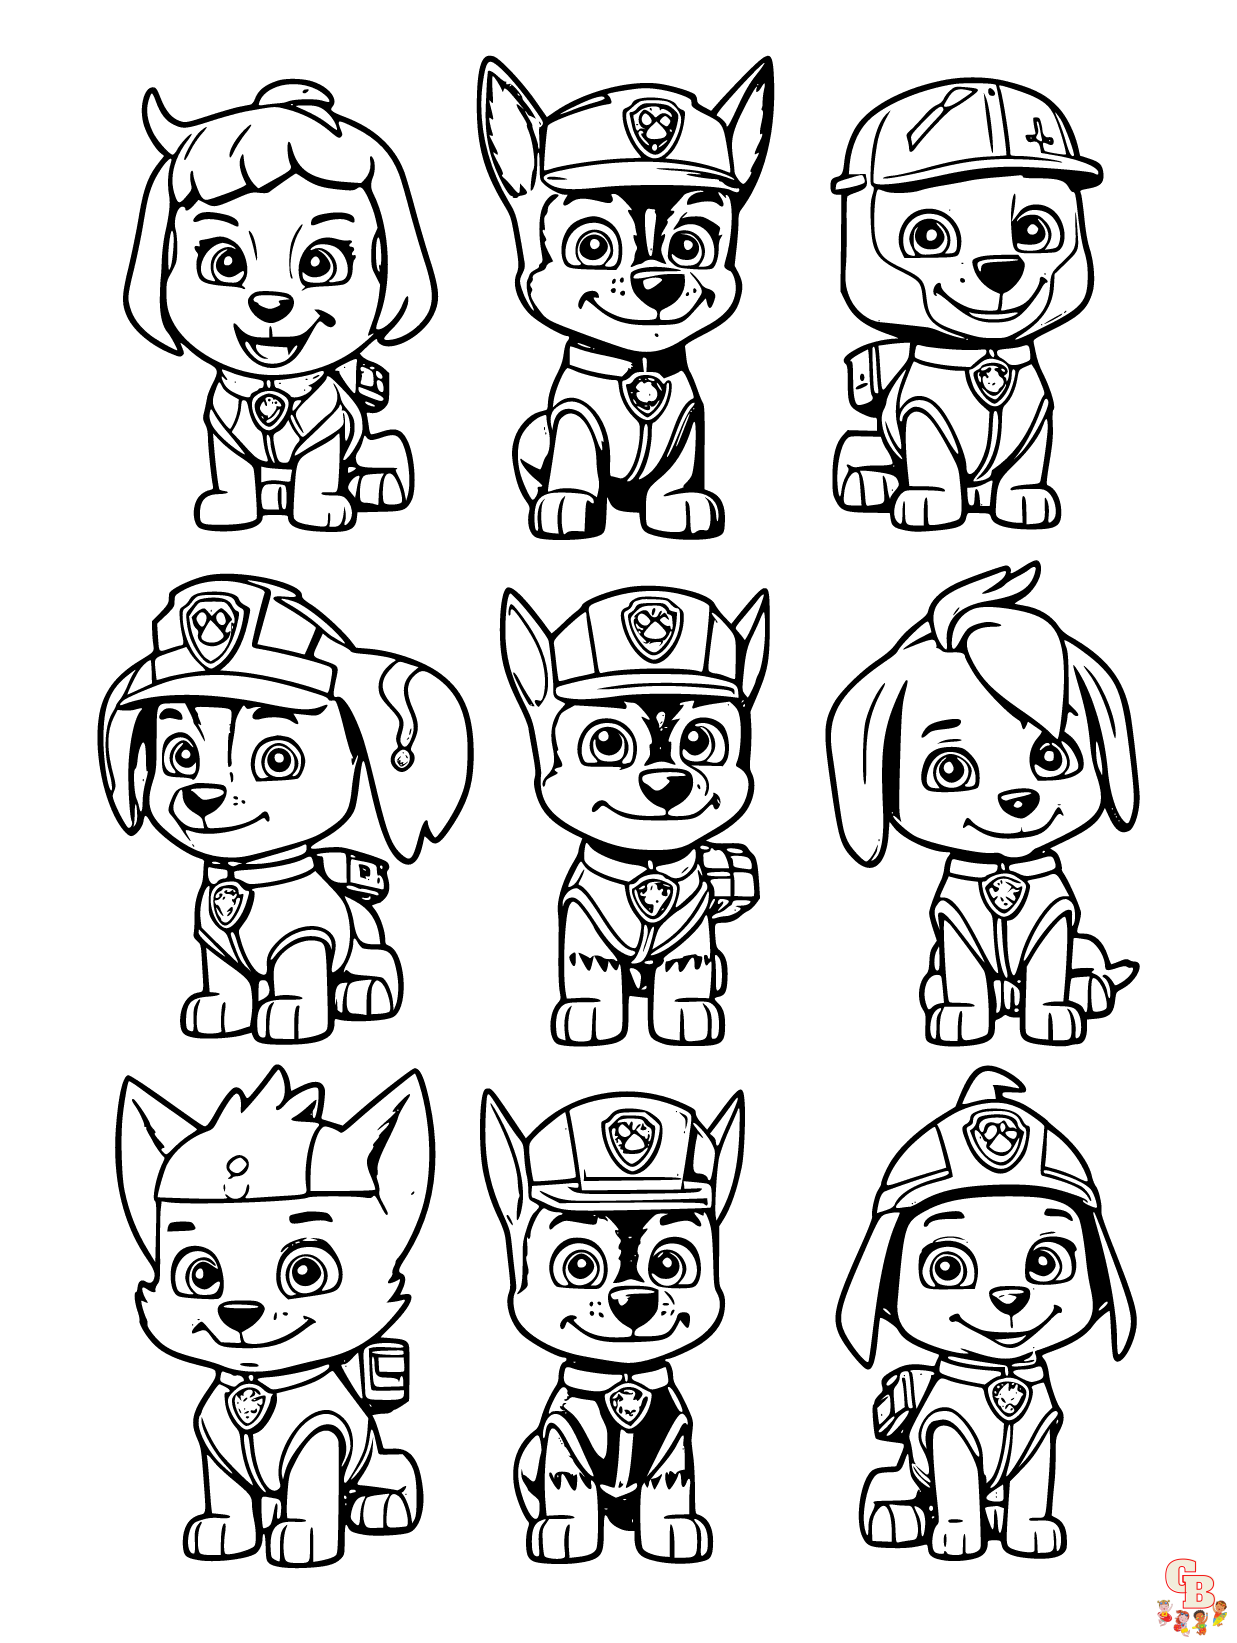 Free paw patrol coloring pages printable and easy options gbcoloring